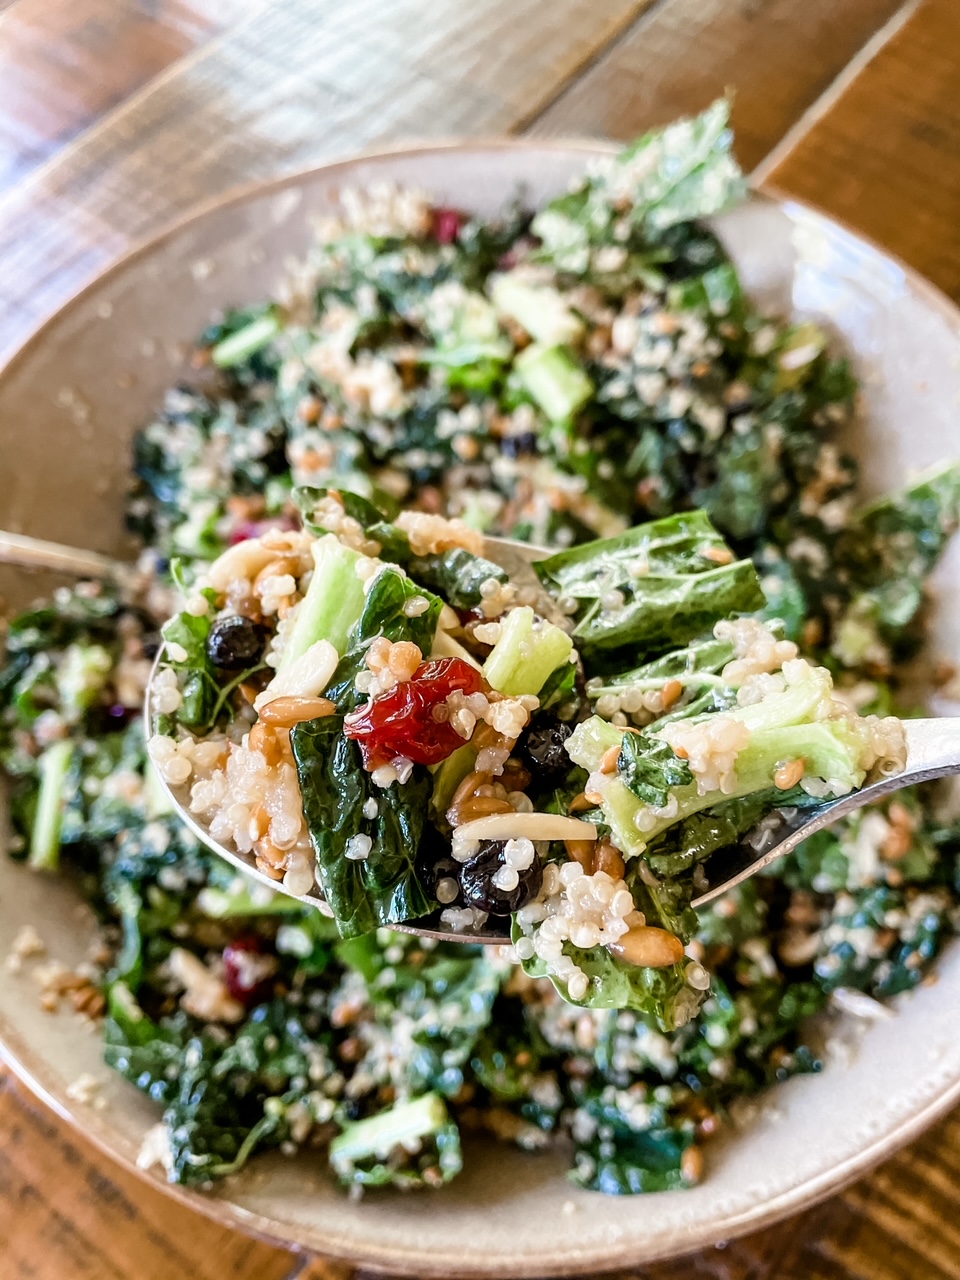 A forkful of the Kale Superfood Salad Recipe